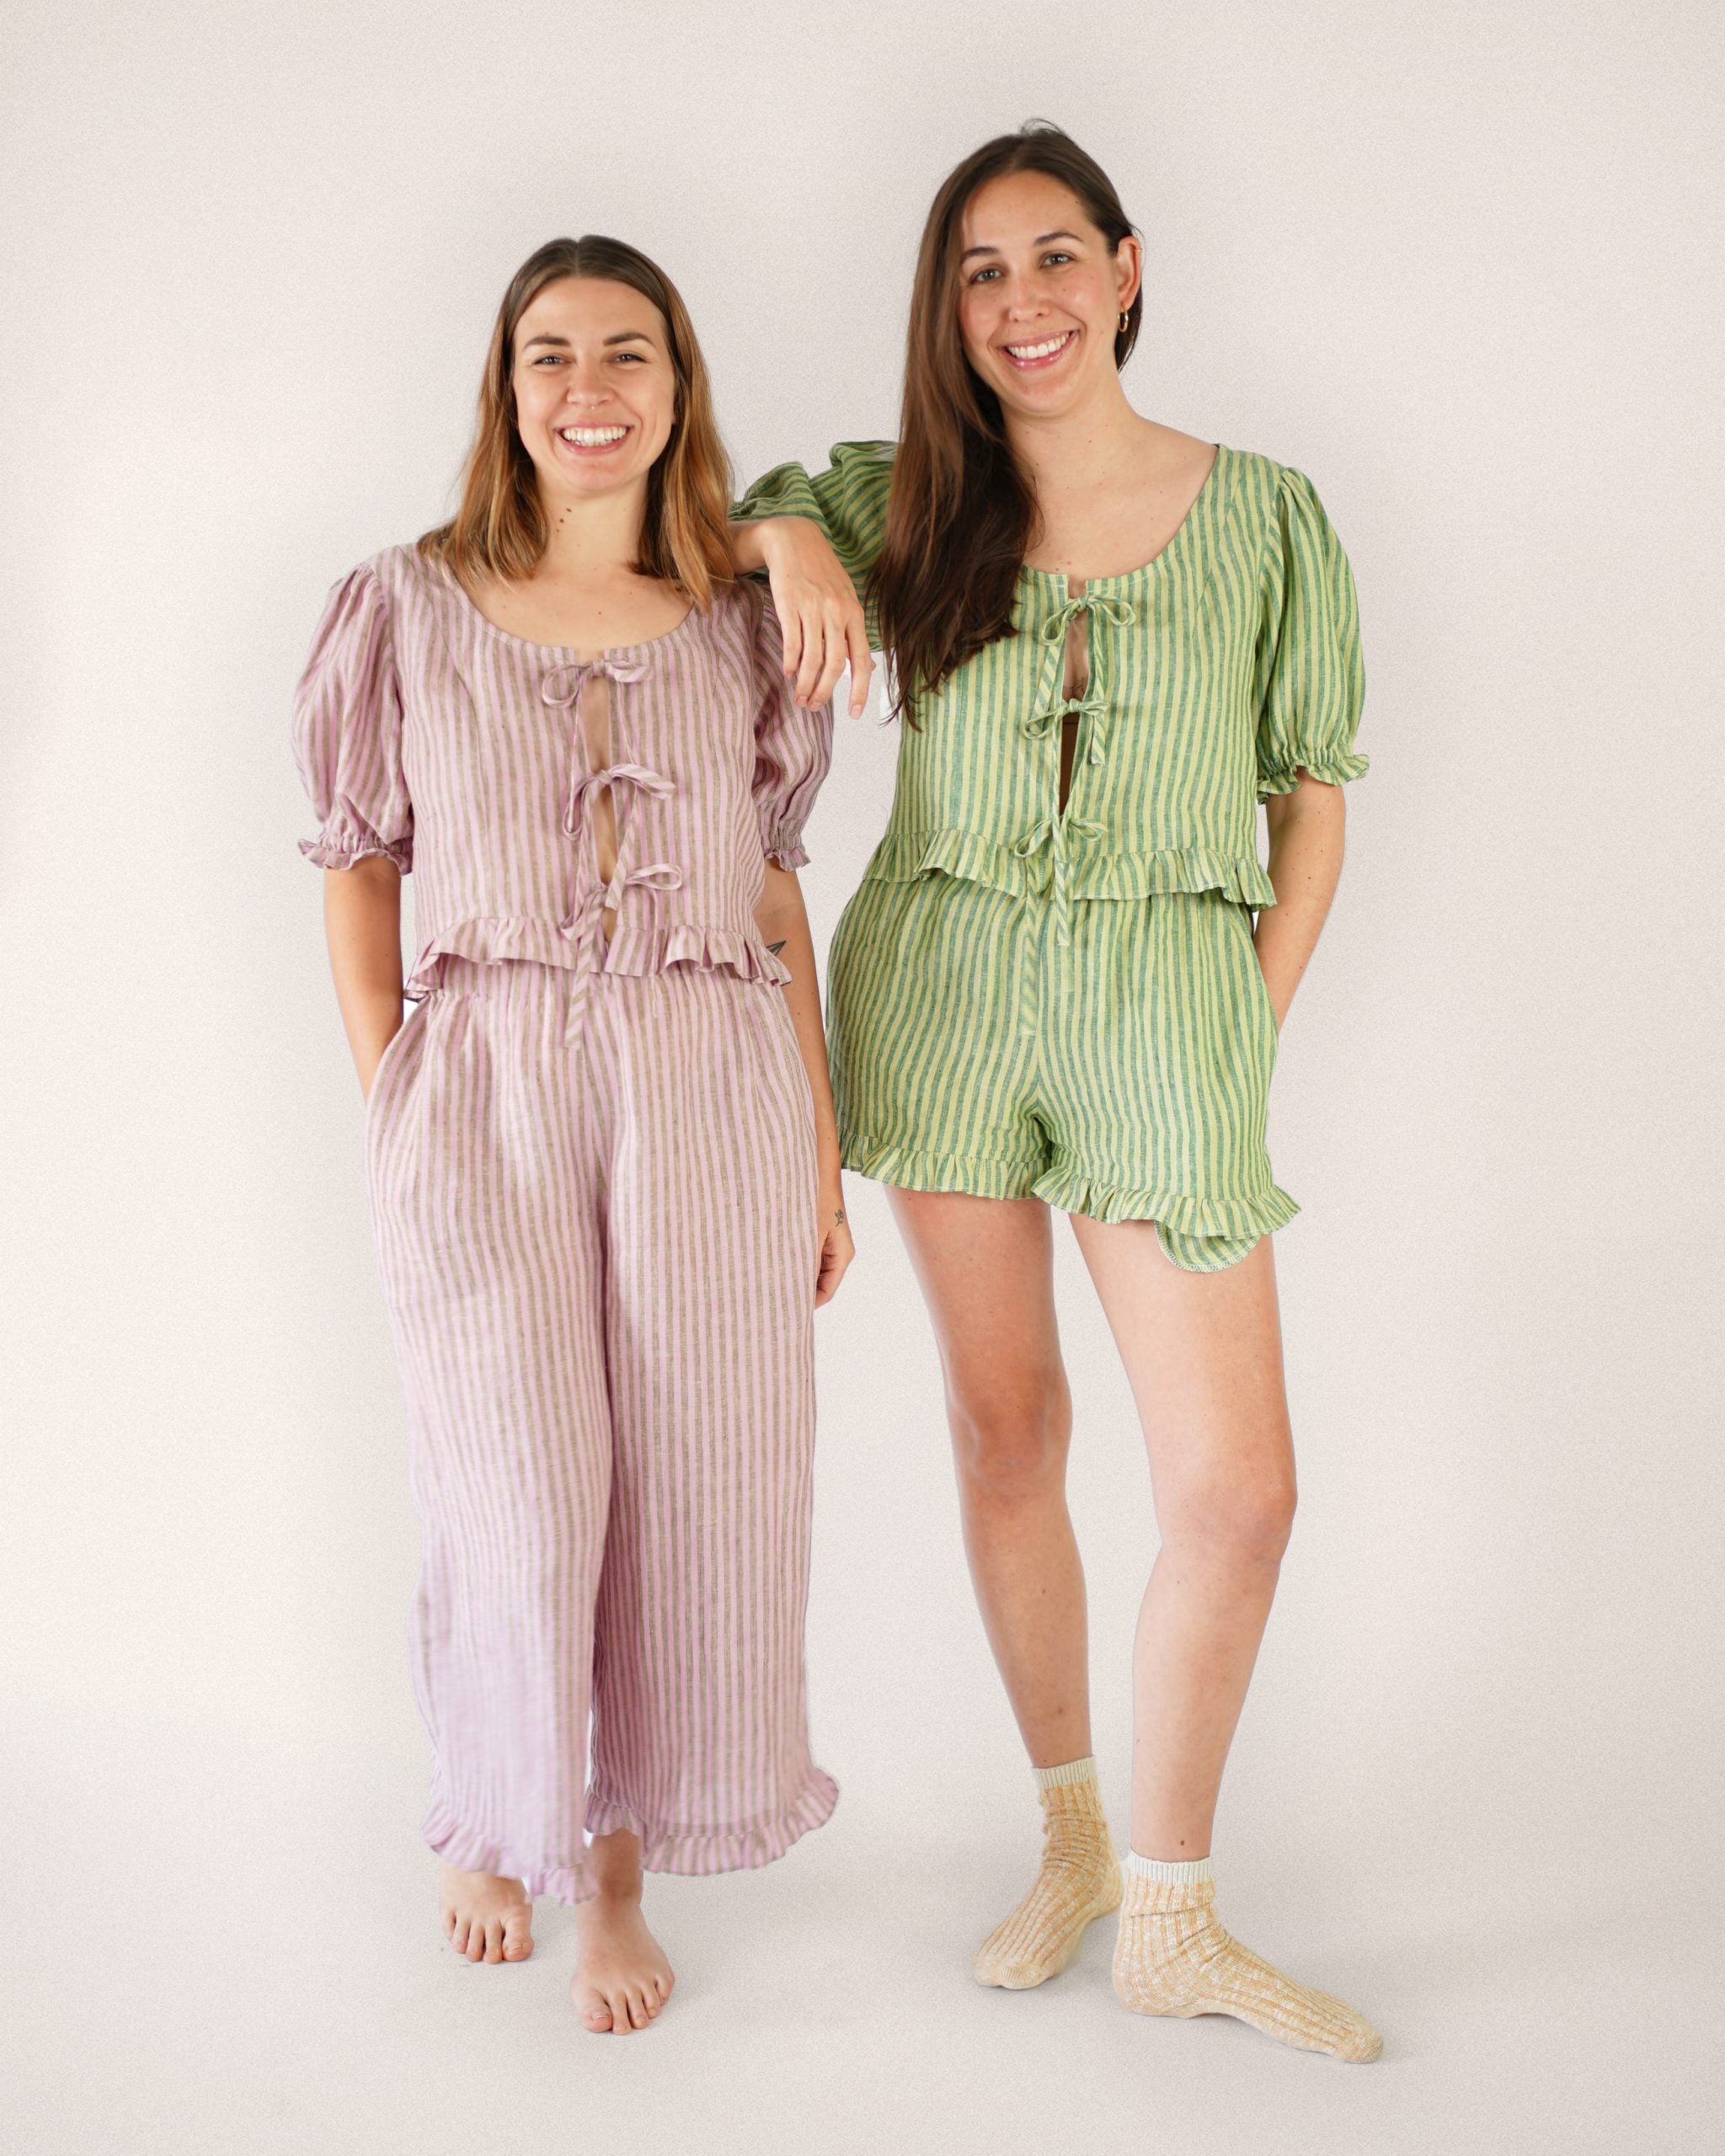 Women wearing the Ruffle Brunch Set sewing pattern from Matchy Matchy Sewing Club on The Fold Line. A two-piece set pattern made in linen, cotton, or rayon fabric, featuring a slightly cropped top with a wide scooped neckline, princess seams, puffed sleev